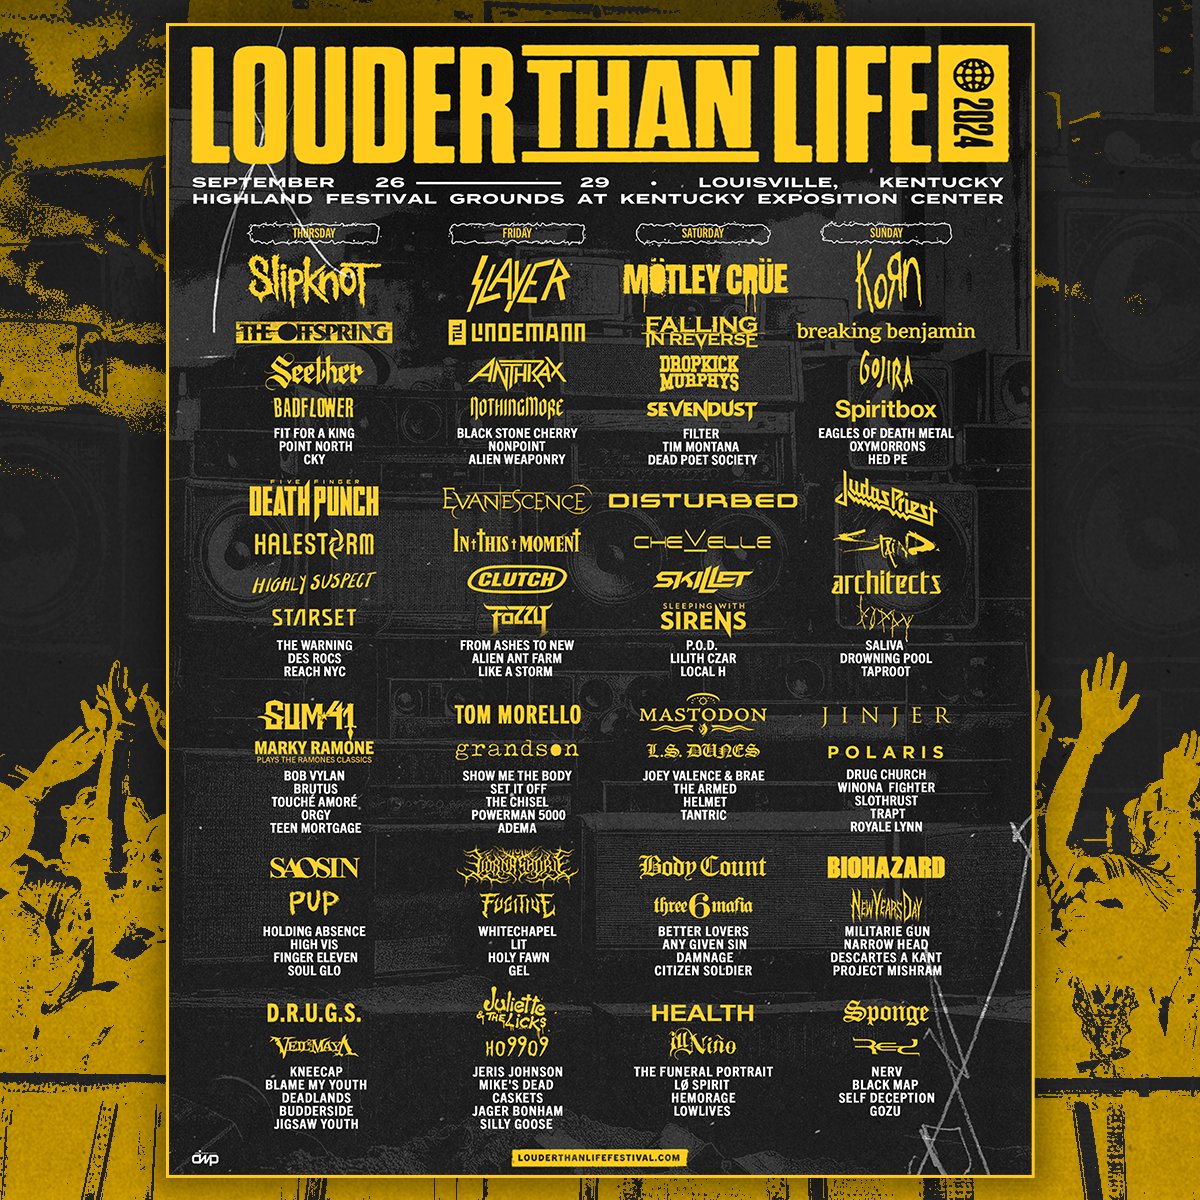 Freaks!! We're so pumped to be back in Louisville, KY for @ltlfest this September! They've got a killer lineup to celebrate the 10th anniversary, so make sure you grab your tickets today🤘. We'll see you on September 26th, get ready to rock! bit.ly/ltl2024